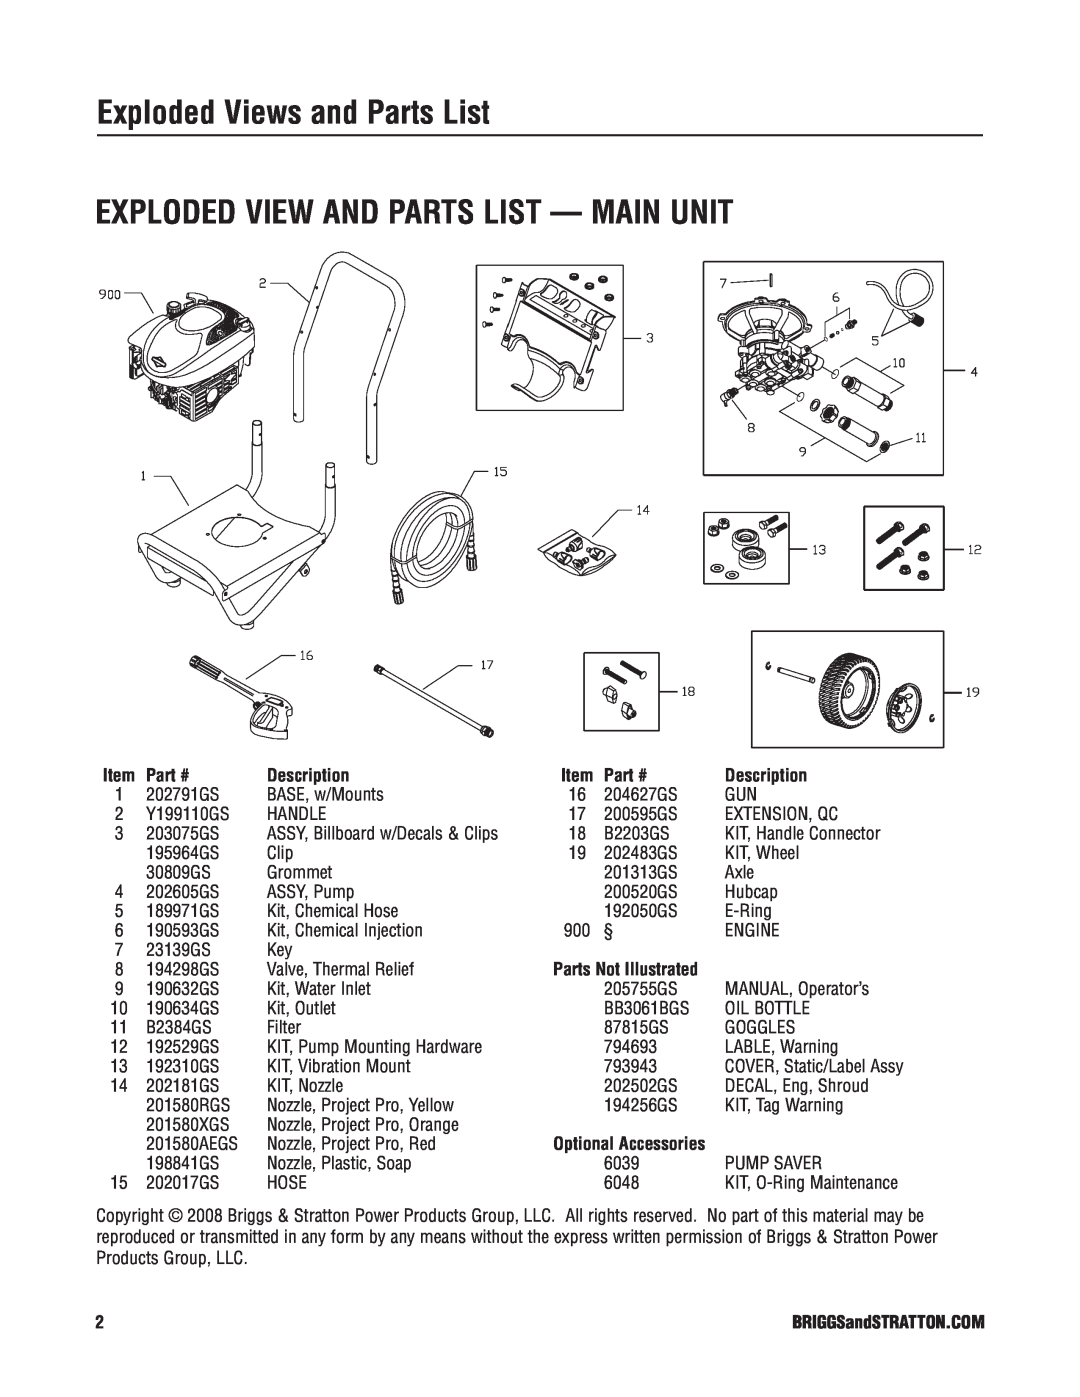 Briggs & Stratton 20273 manual Description, Parts Not Illustrated, Exploded Views and Parts List 